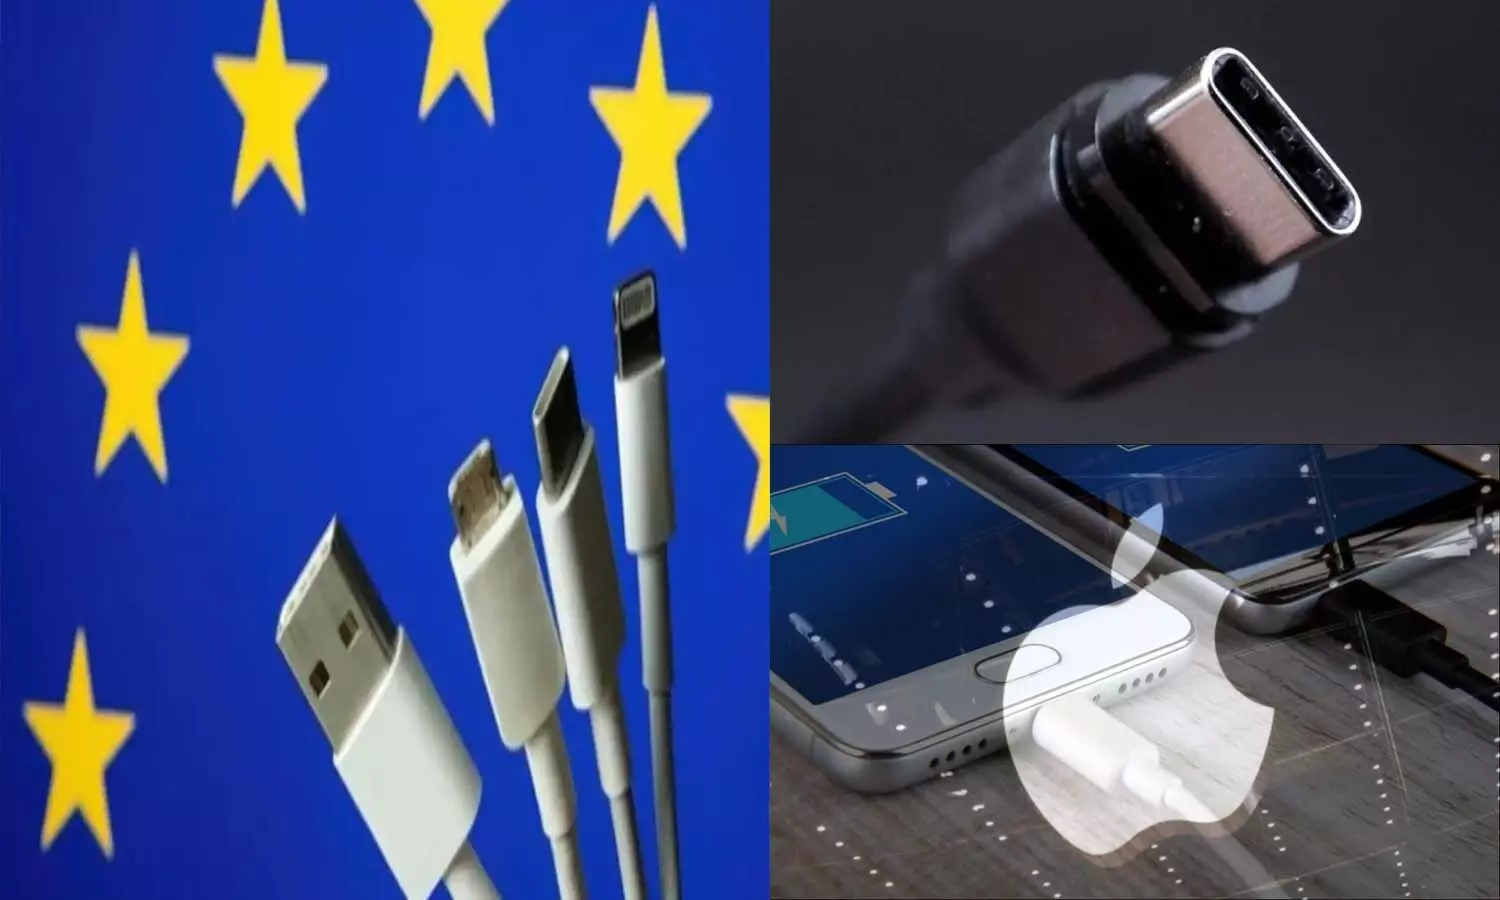 New rule in Europe, same charger for all devices, Apple was shocked